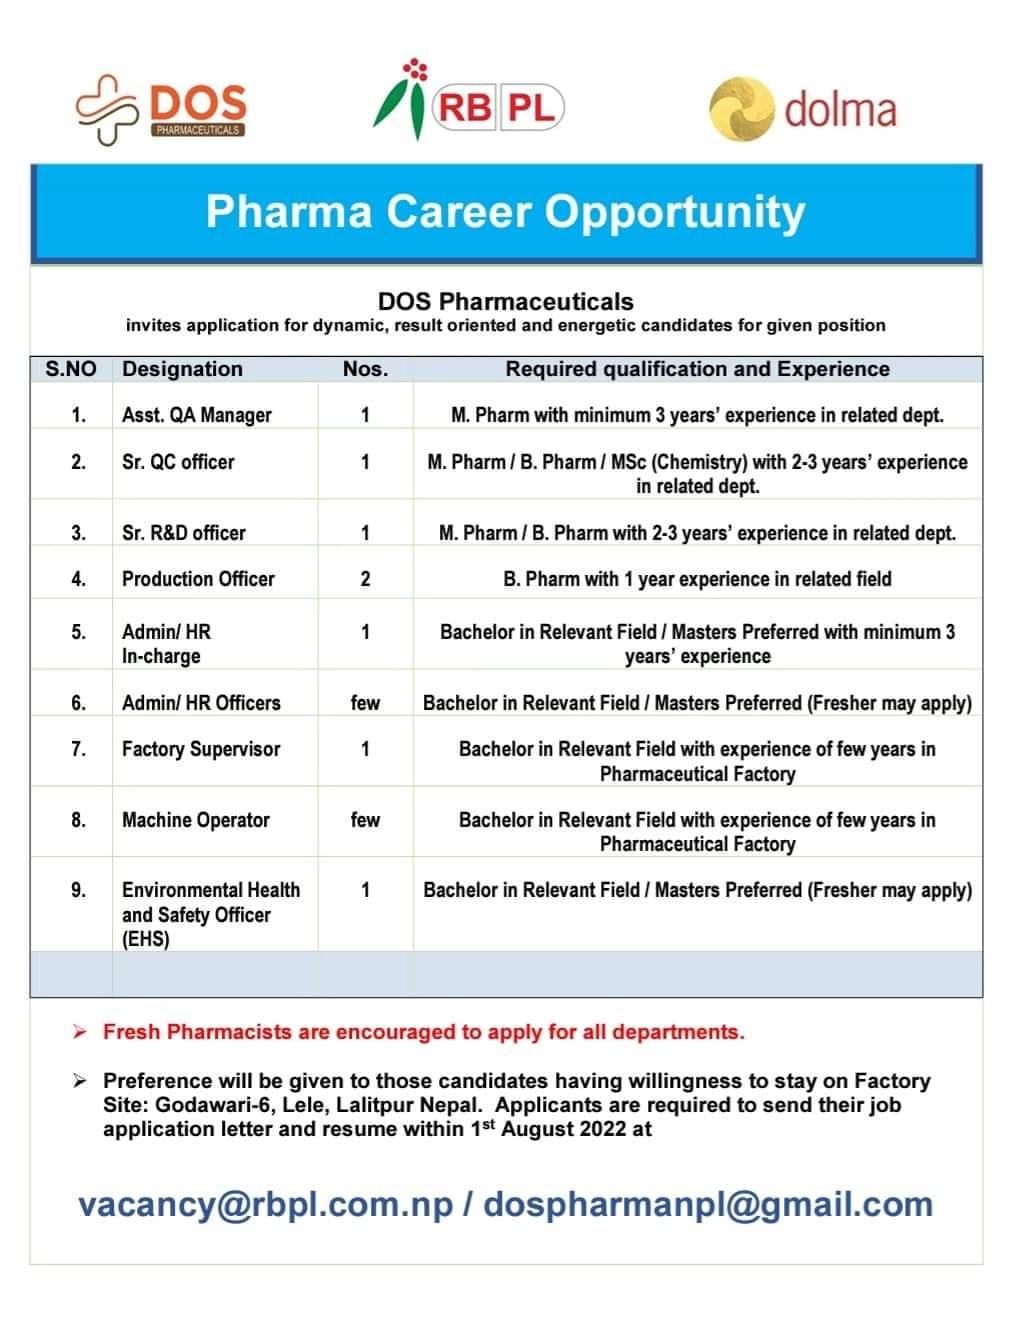 Vacancy Announcement for Pharmacist